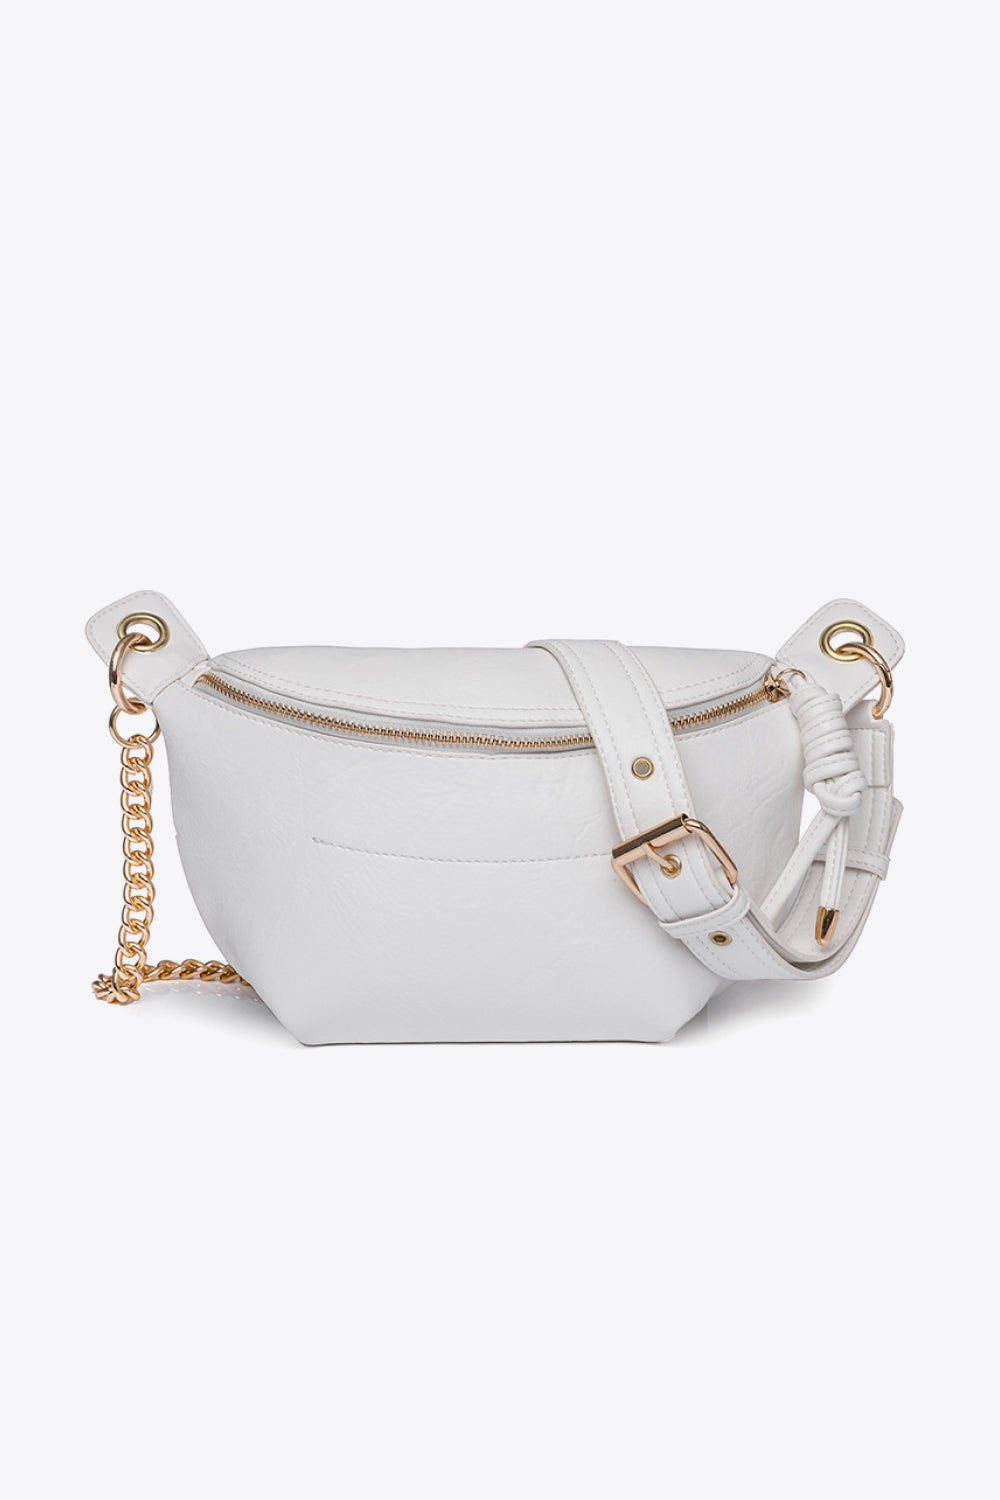 PU Leather Chain Strap Crossbody Bag White One Size